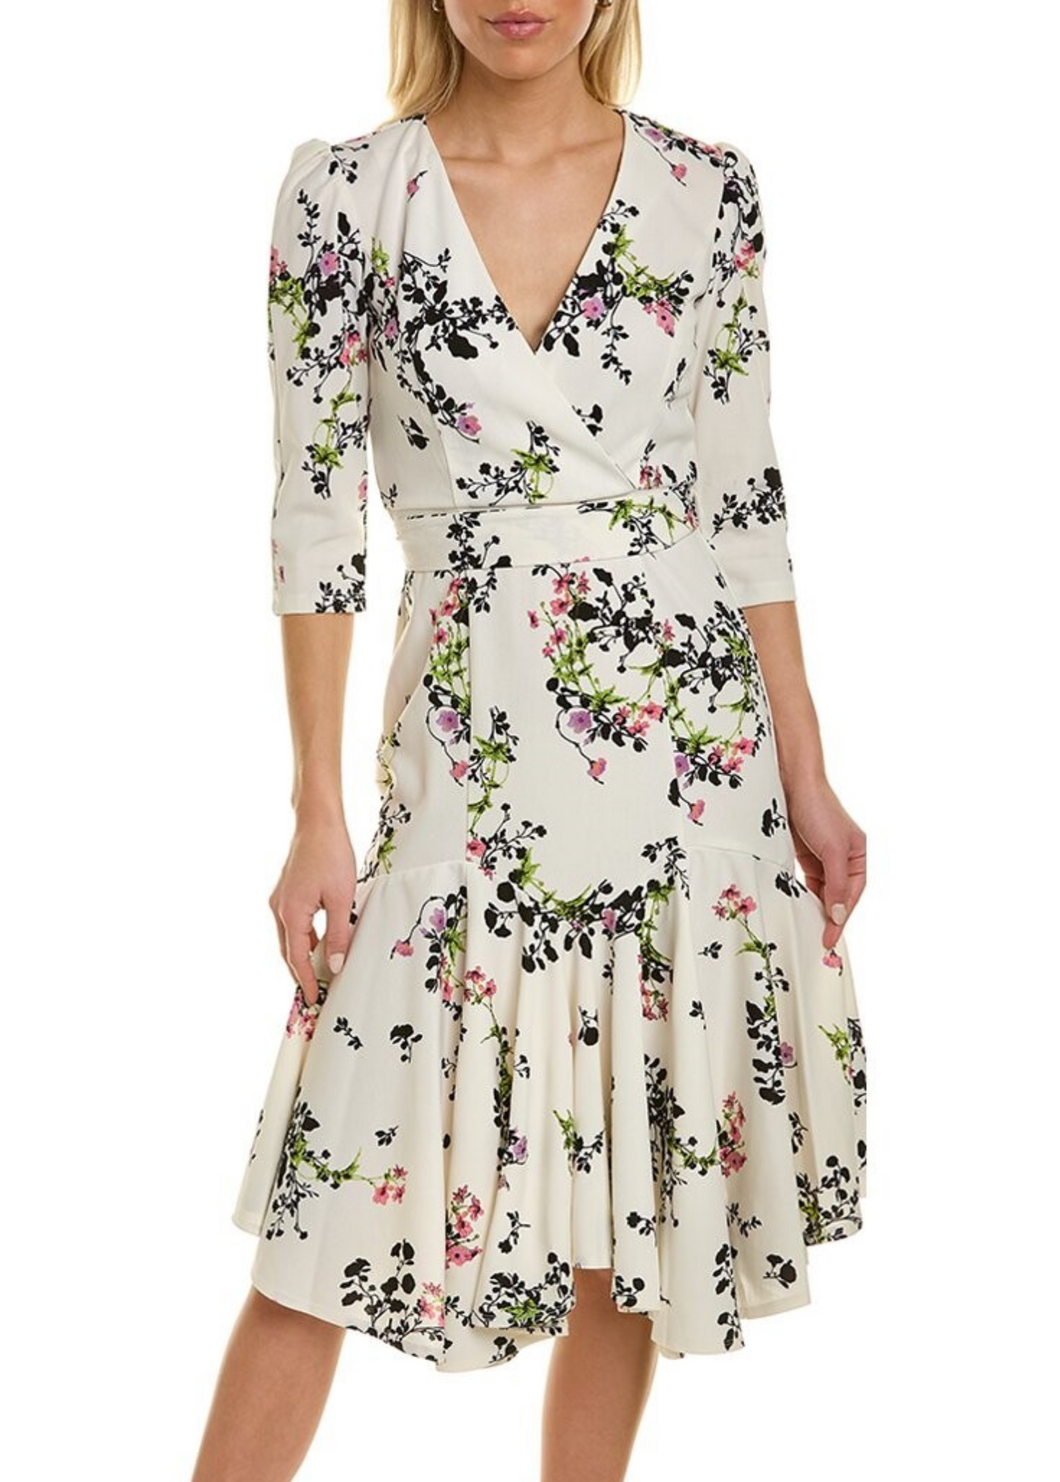 A+ Maison Tara Belted Floral Faux Wrap Day Dress Sizes 4/6/12 Remaining!